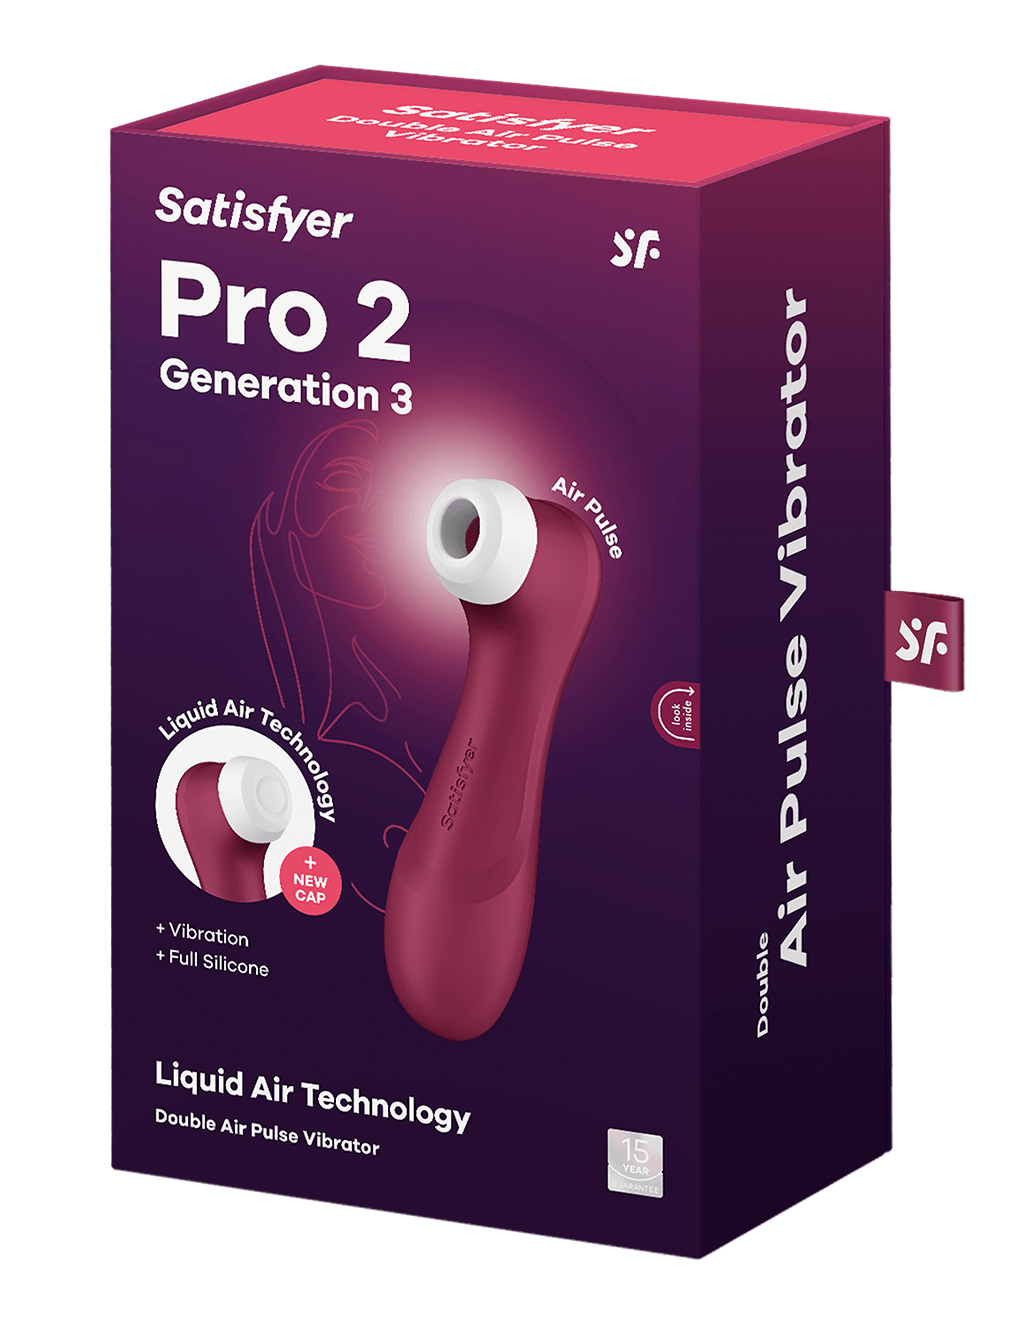 Satisfyer Pro 2 Gen 3 Liquid Air and App Sex Toys at Hustler Hollywood Adult Picture